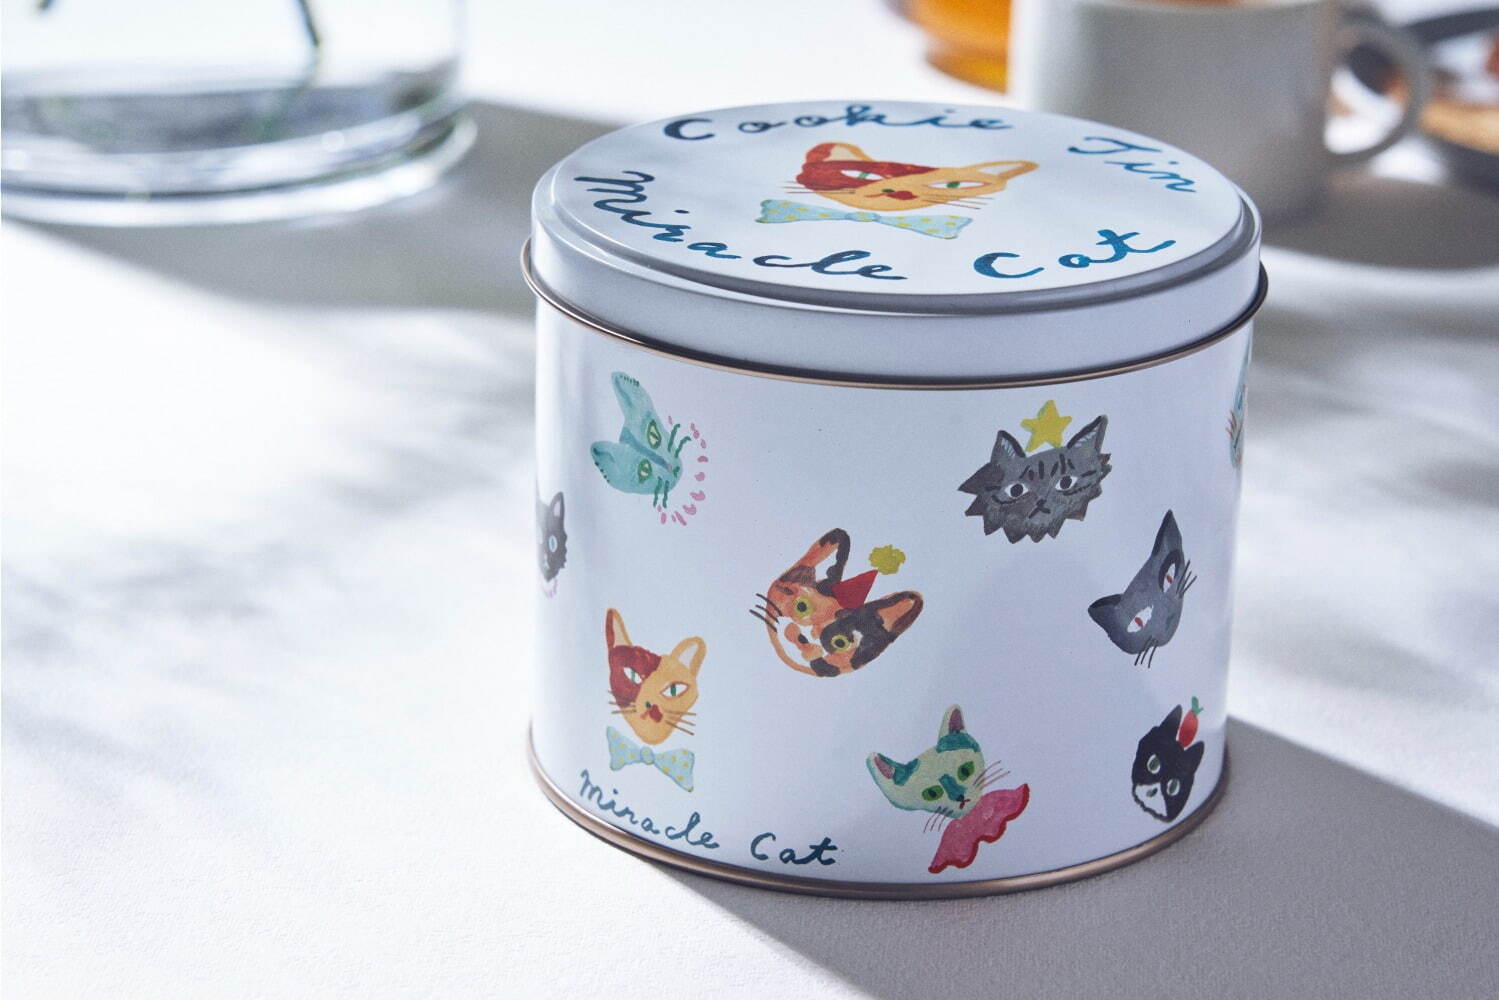 「Miracle Cat Cookie Tin」15枚入り(5種×各3枚) 2,400円